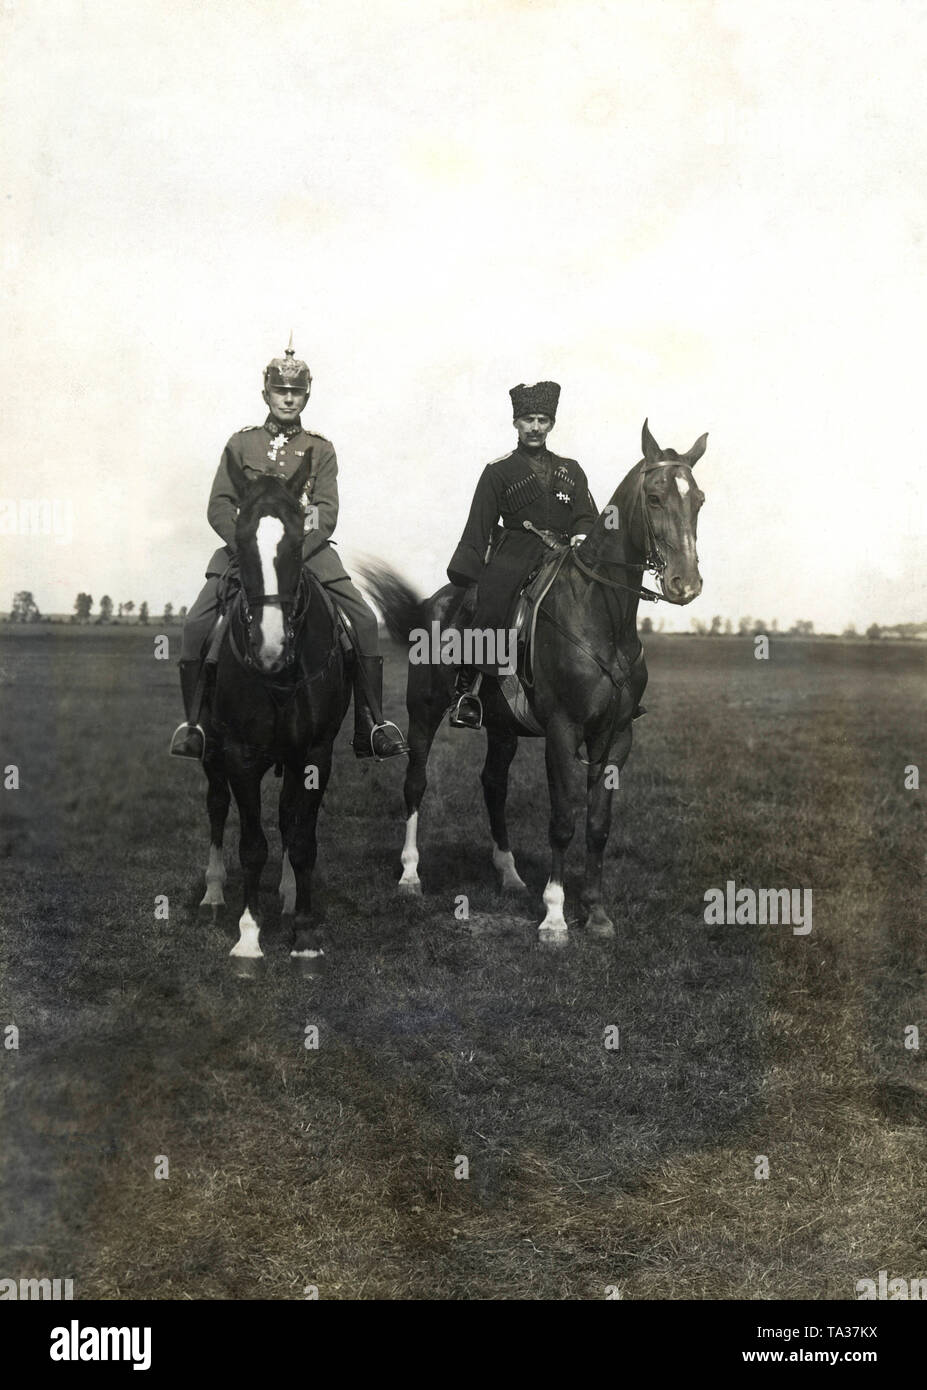 The supreme commander of all German troops in the Baltic States, General Rudiger von der Goltz (left, with spiked helmet), and Prince Pavel Rafalovich Bermont-Avalov (right, in Cossack uniform), commander of the so-called West Russian Liberation Army, on their horses at a military review of the Iron Division in Mitau (Latvian: Jelgava). Stock Photo